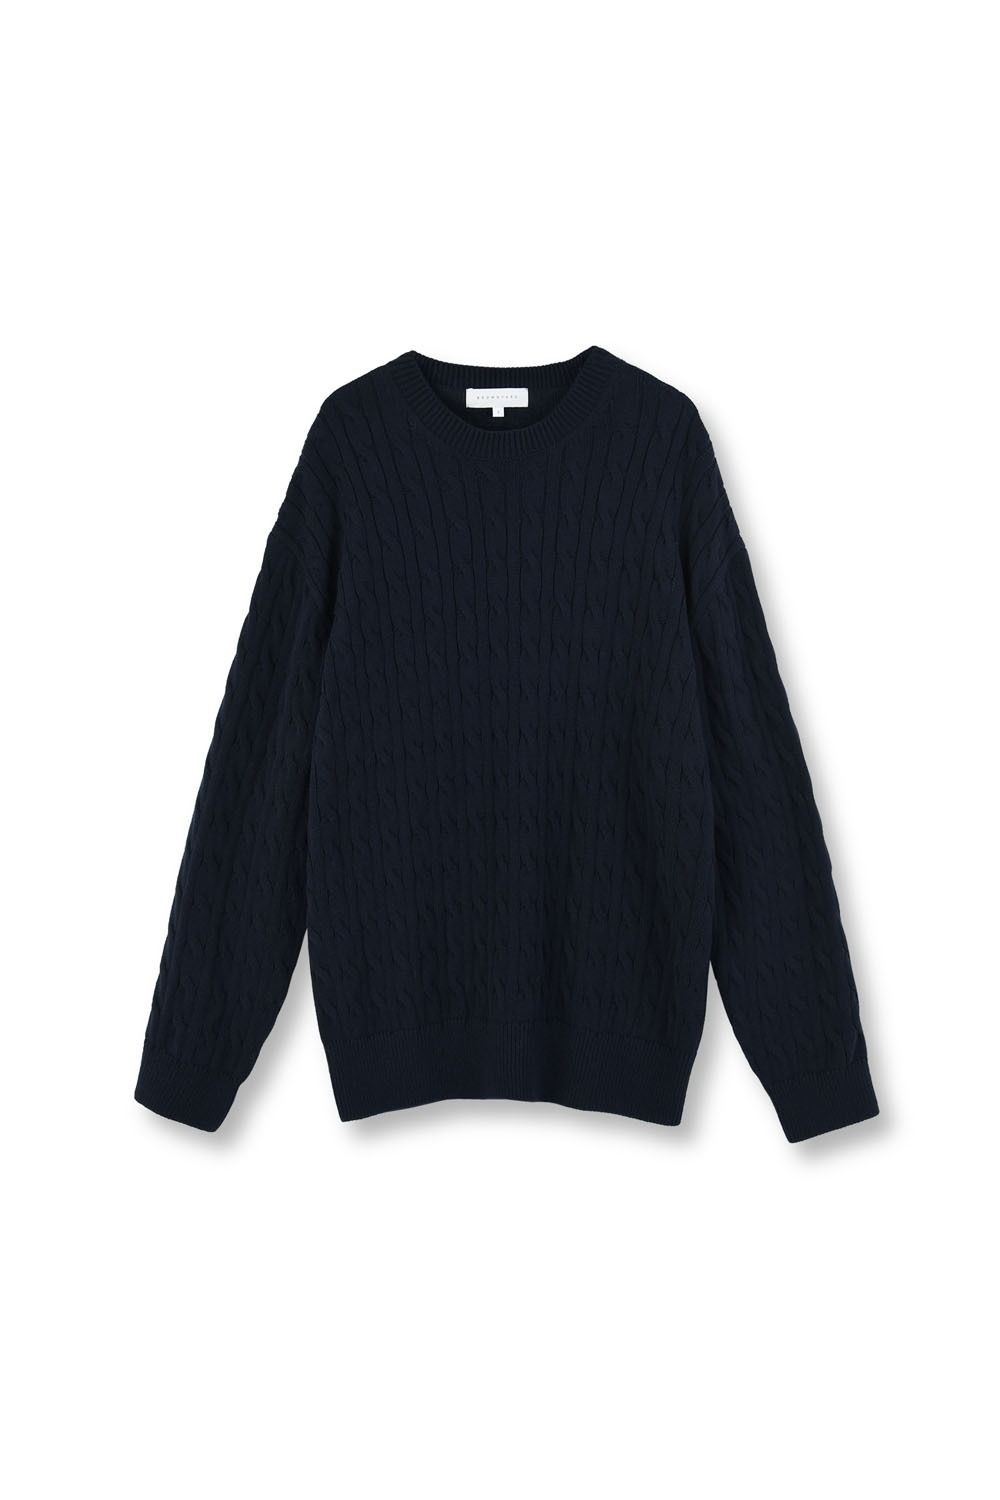 Cashmere Cable Knit - Dark Navy